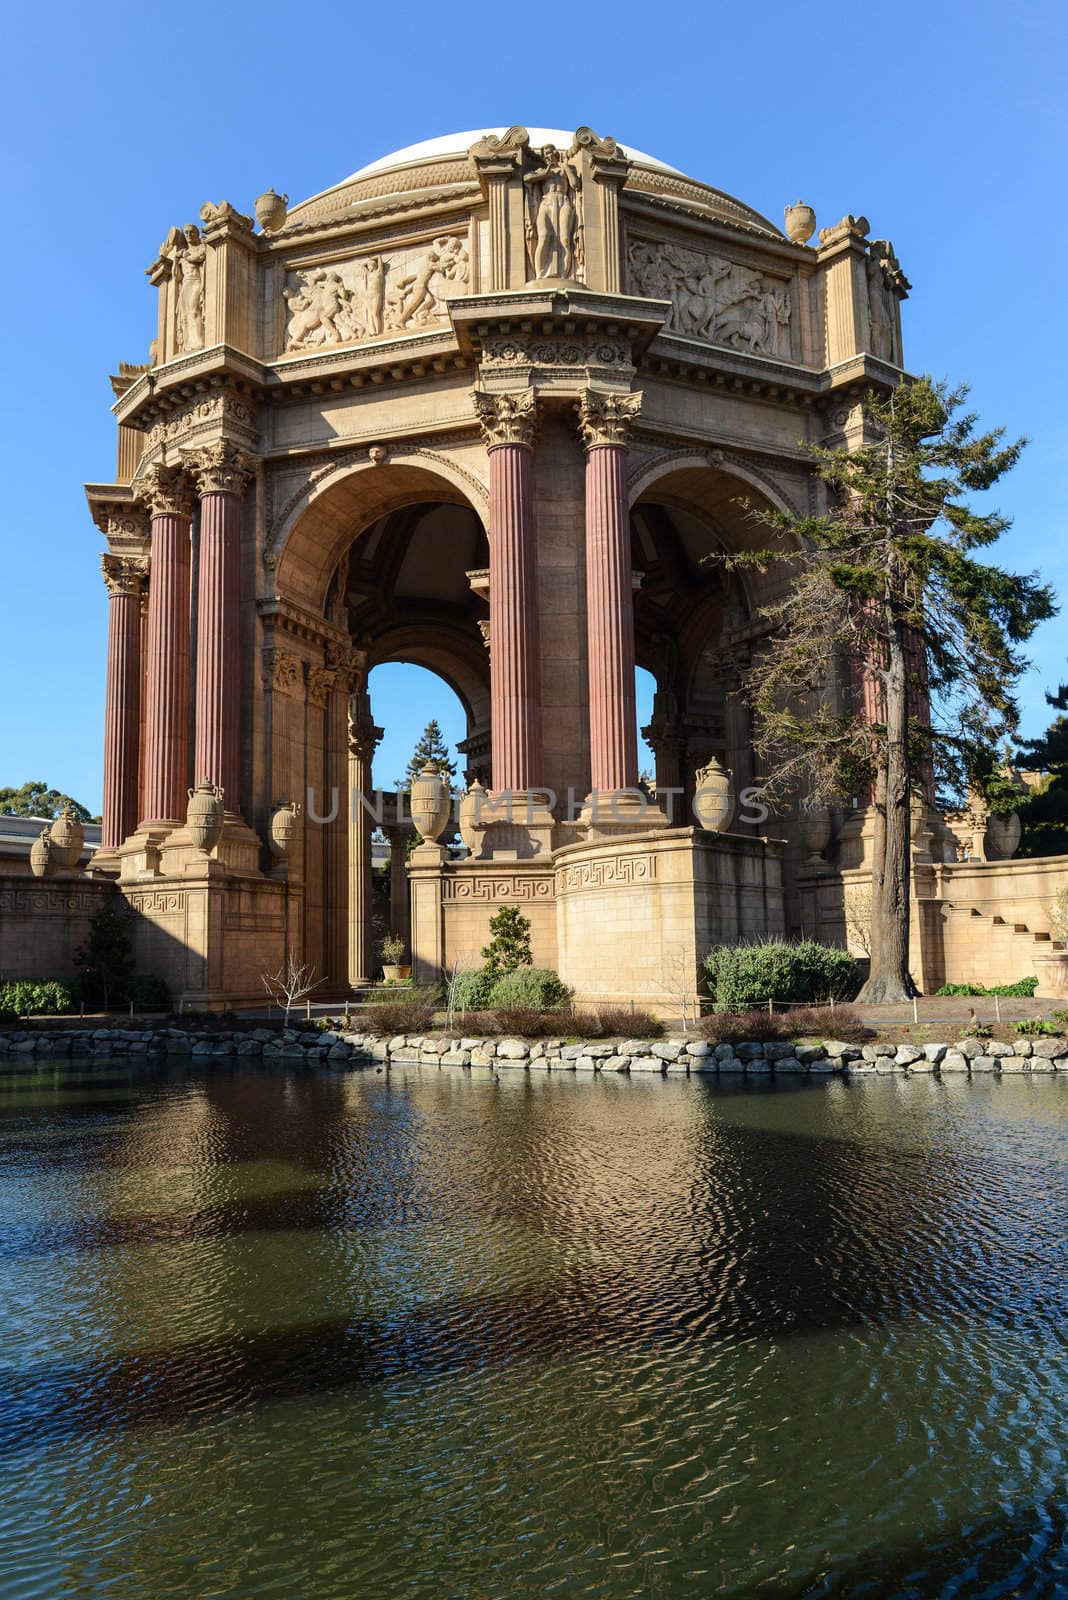 Palace of Fine Arts in San Francisco by bbourdages